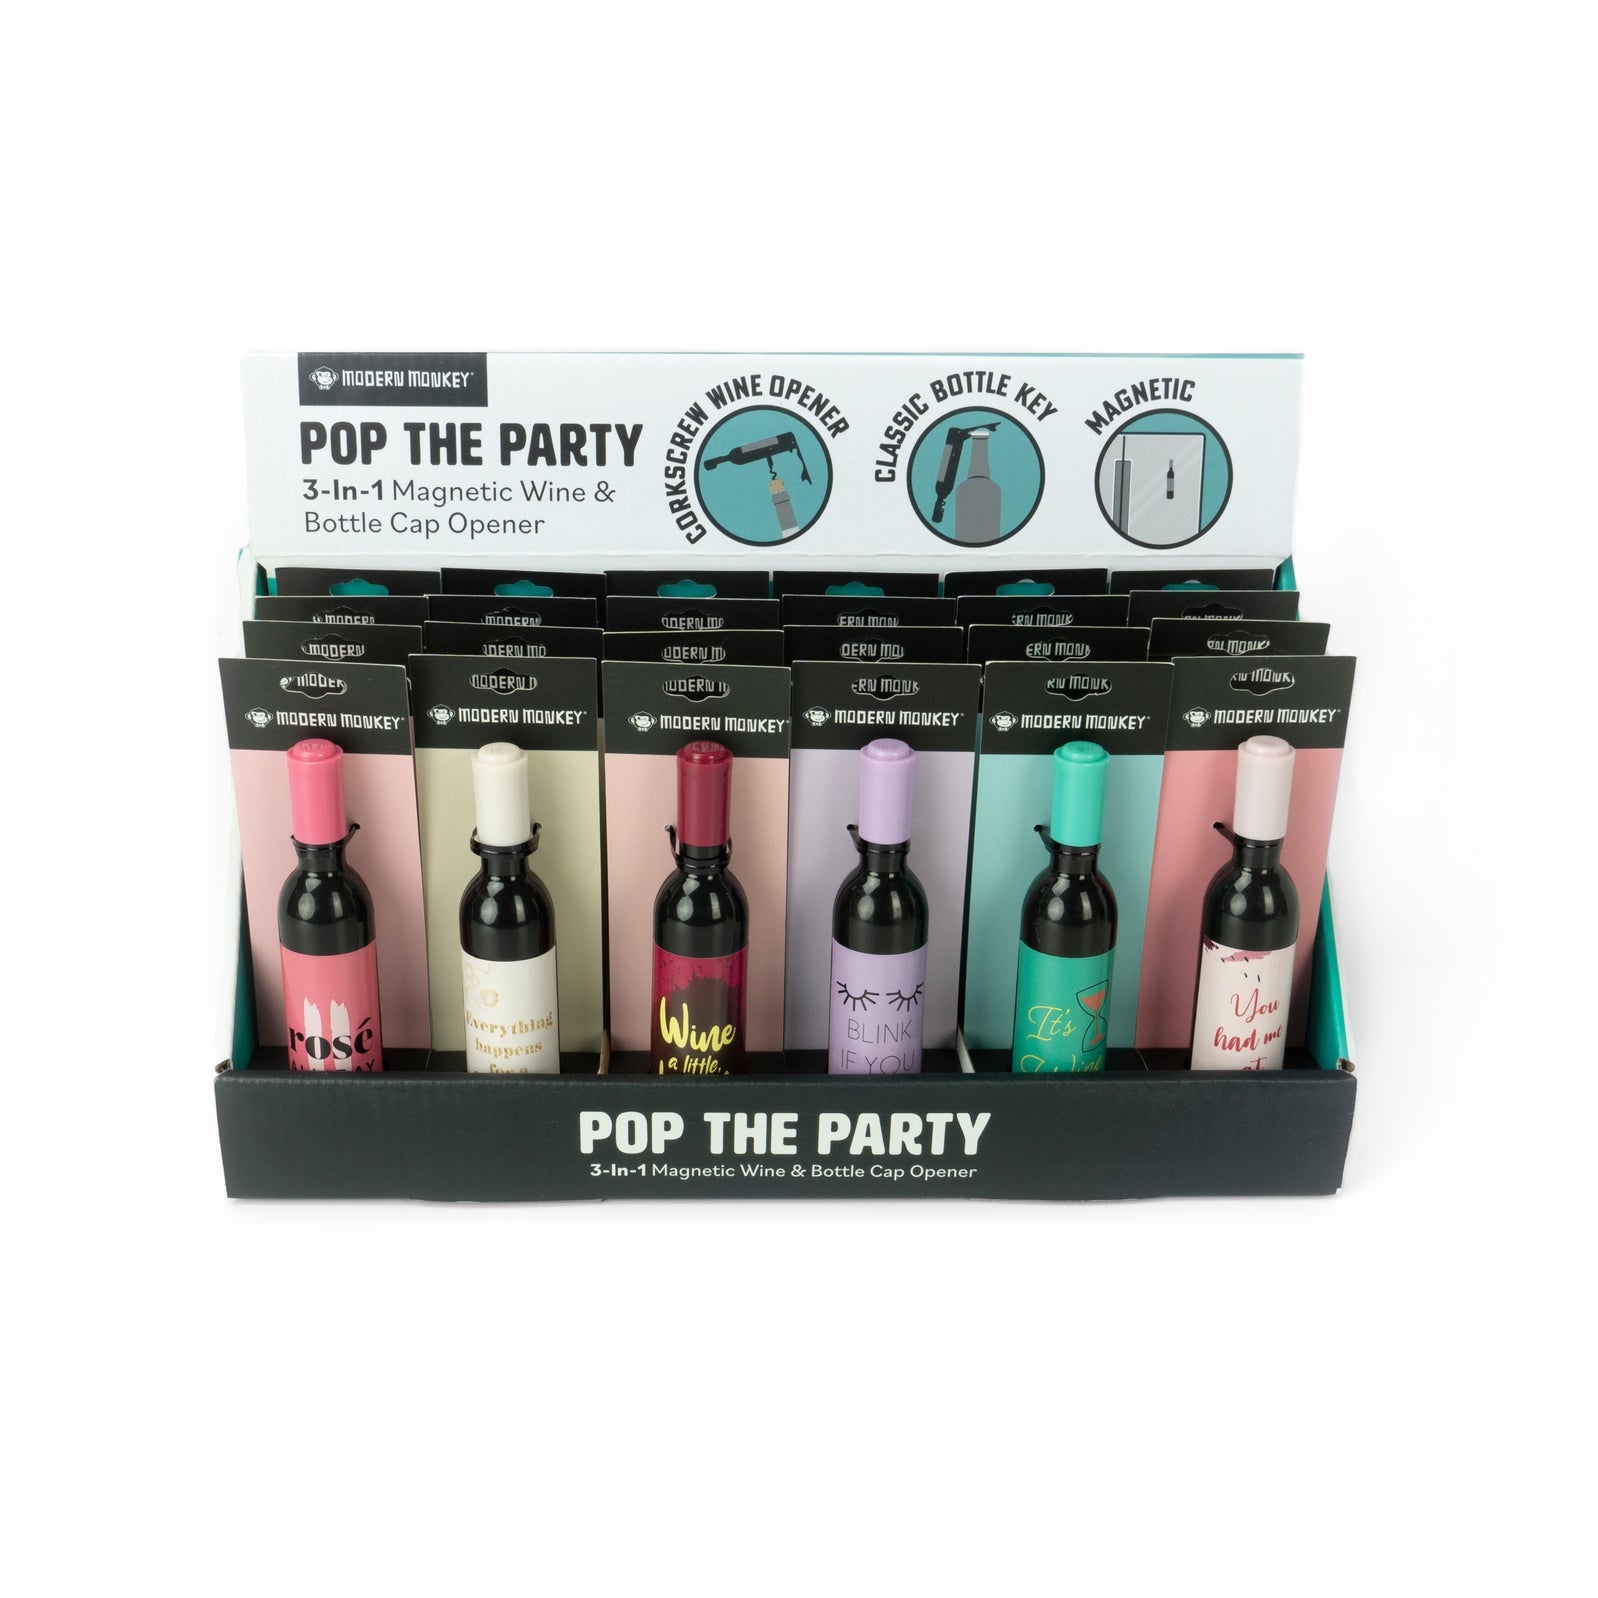 Pop the Party 3-in-1 Magnetic Wine & Bottle Opener